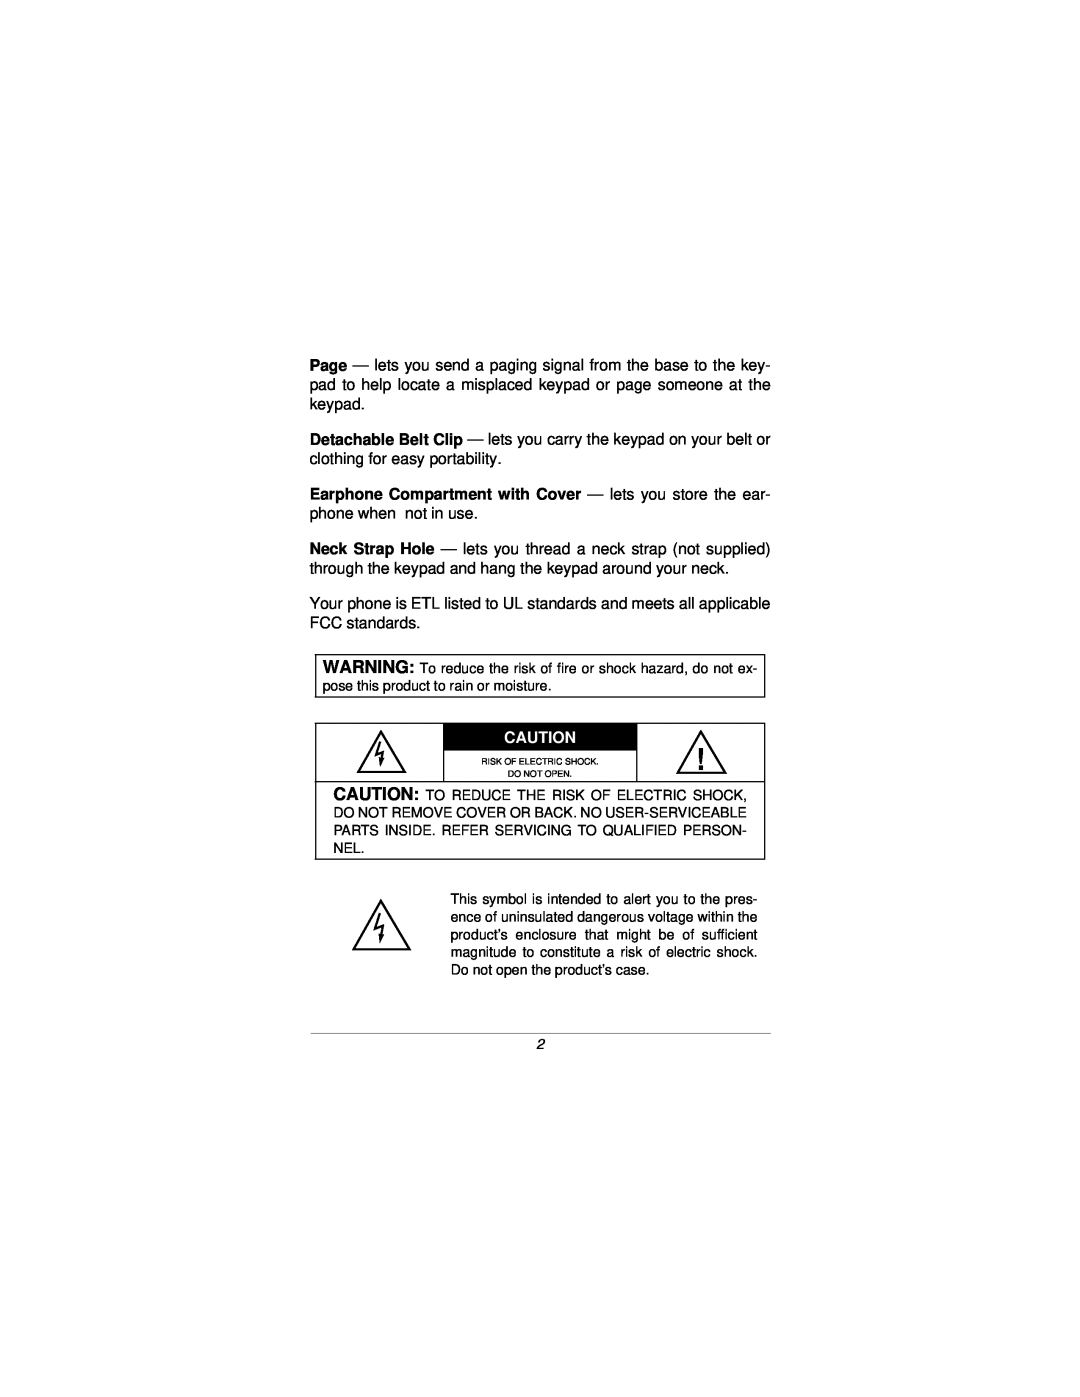 Radio Shack ET-2105 manual Risk Of Electric Shock Do Not Open 